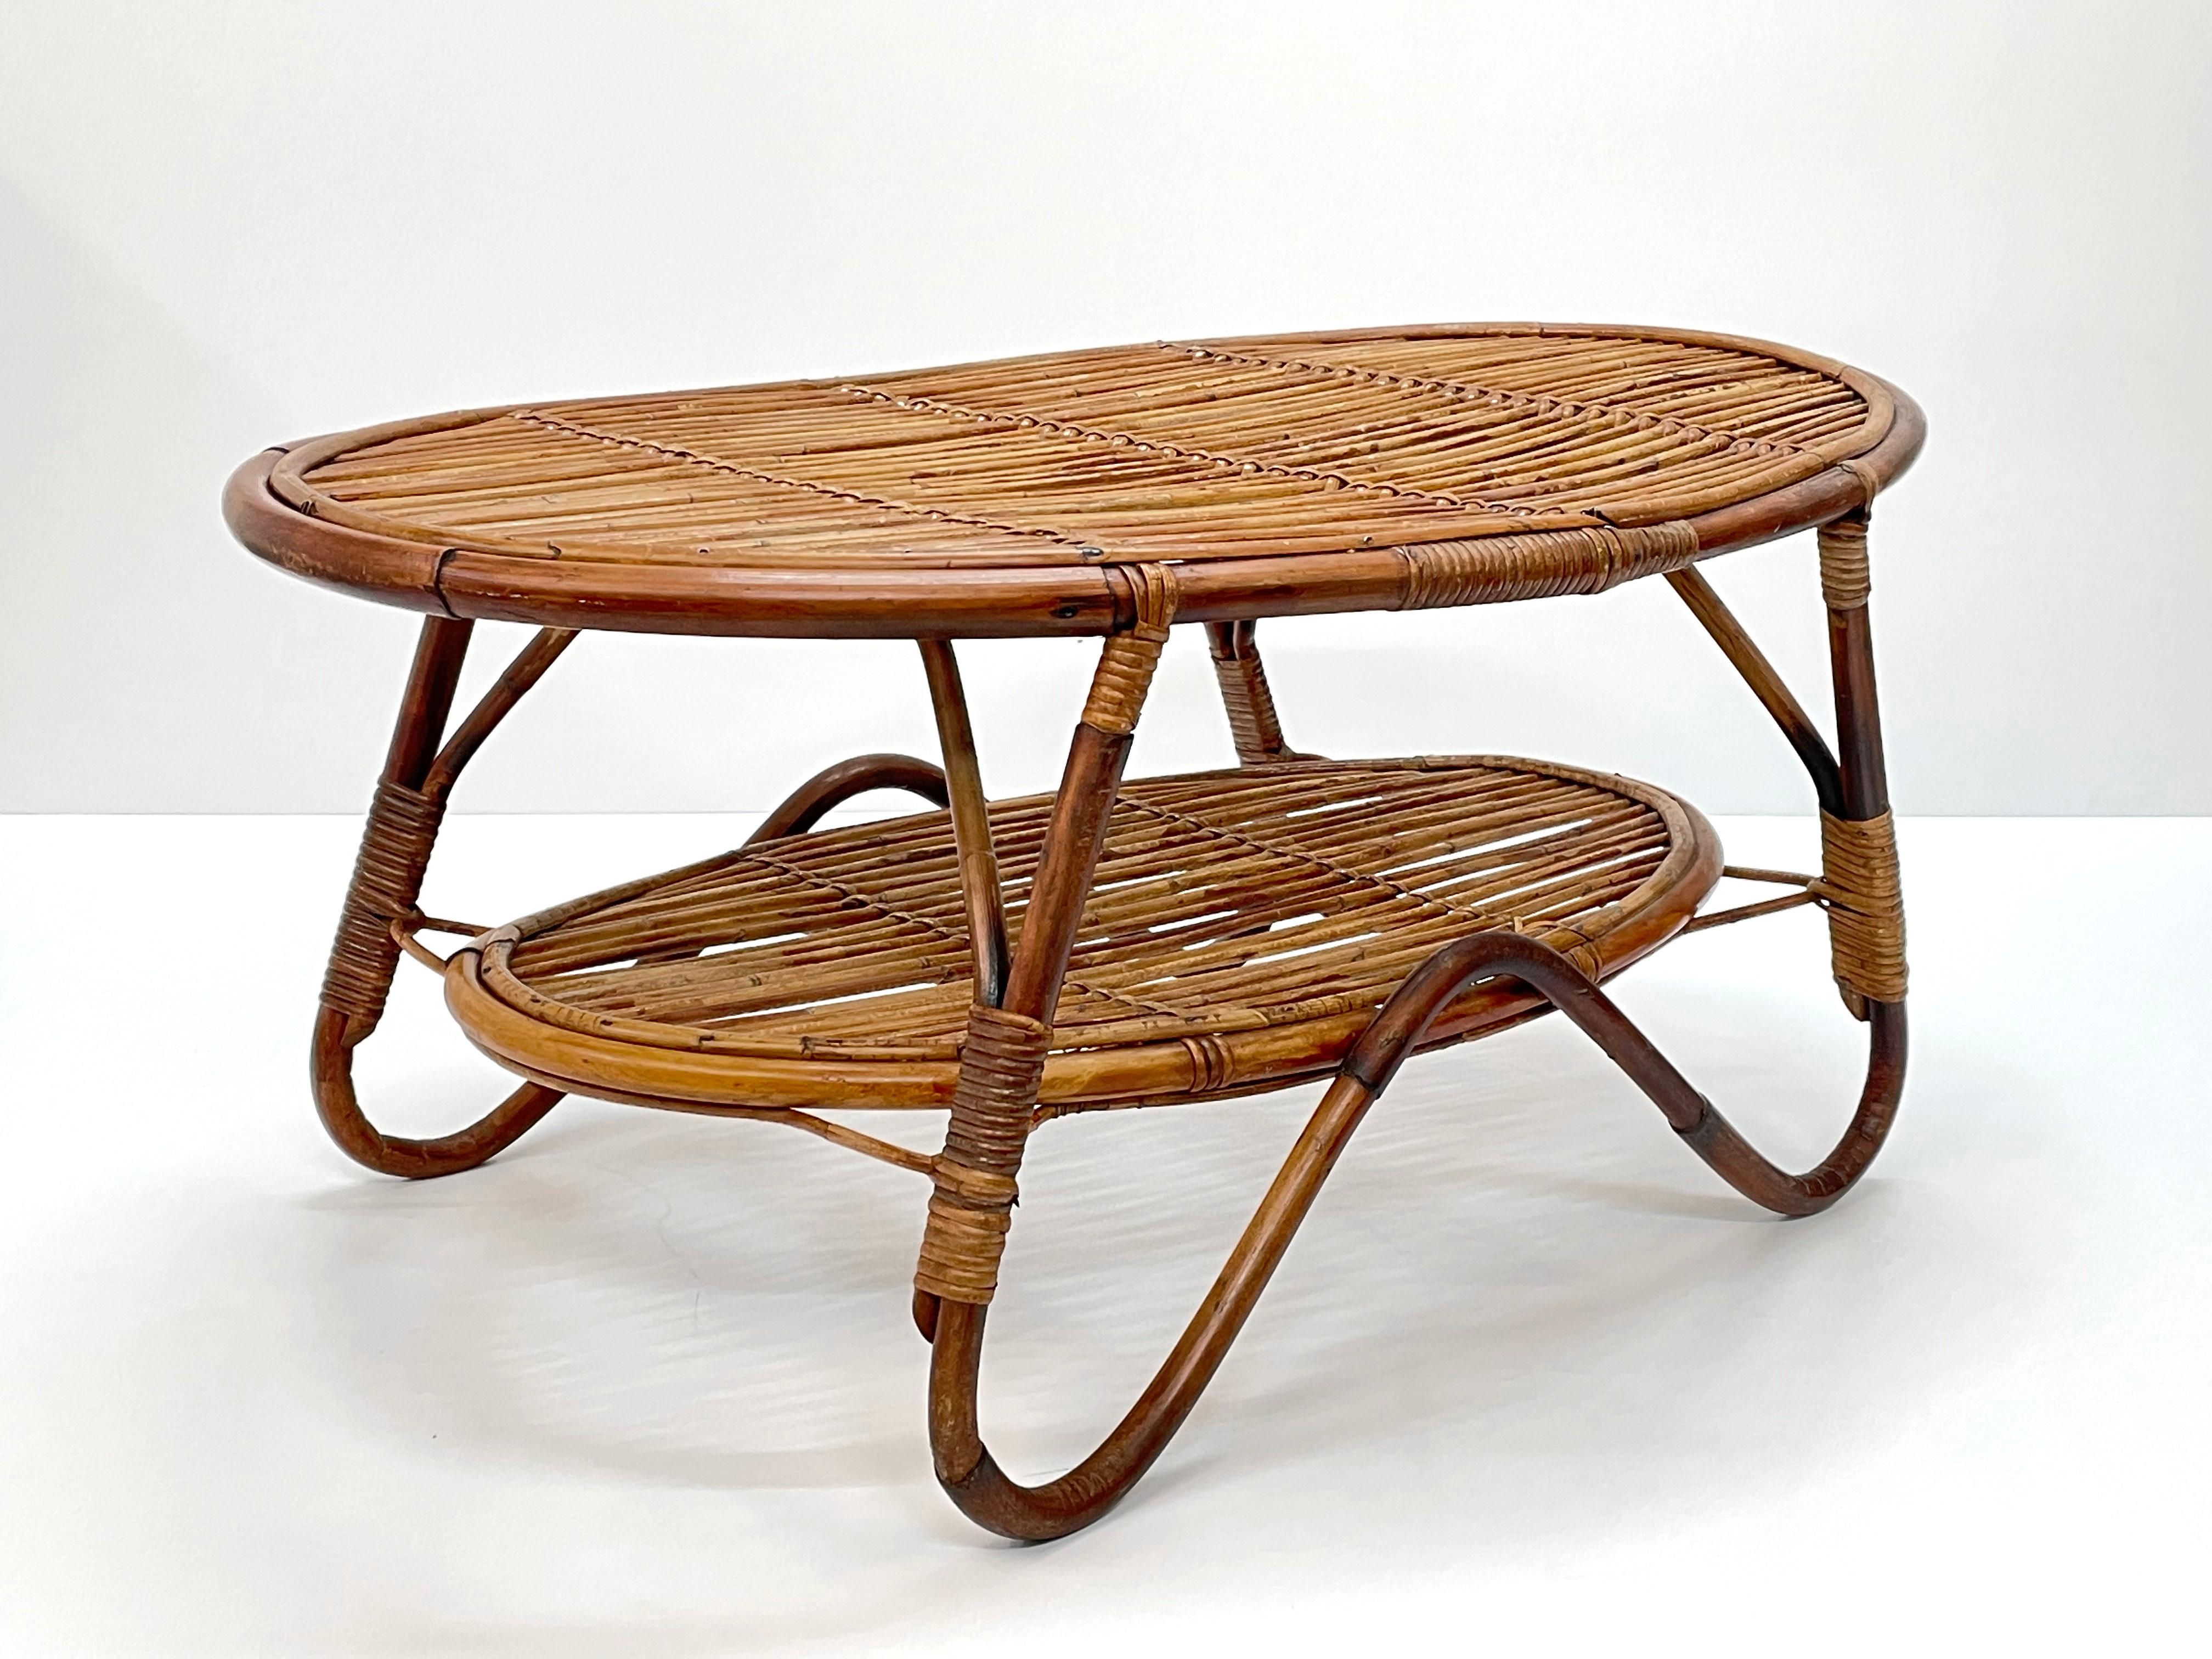 Midcentury Italian Oval Rattan and Bamboo Two Levels Coffee Table, 1950s For Sale 2